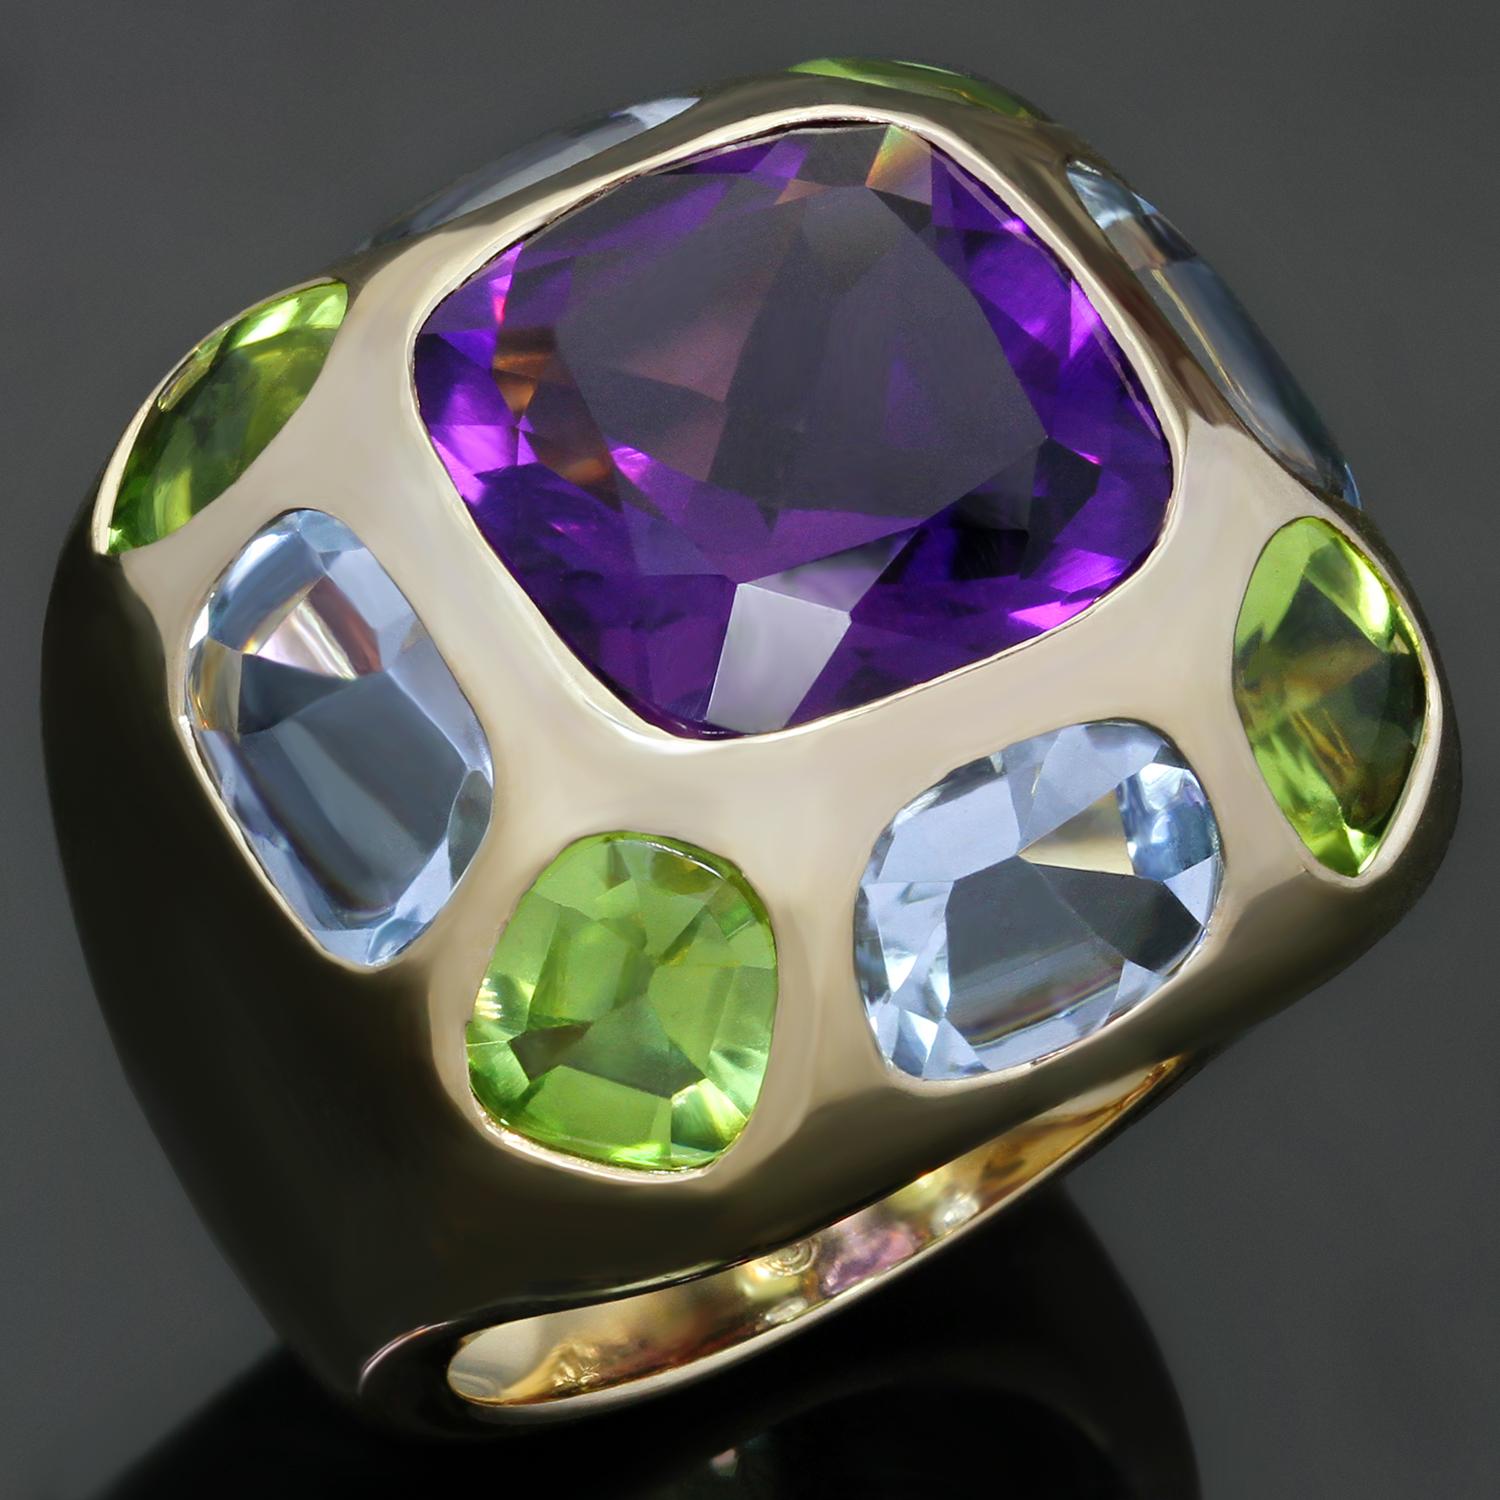 This stunning Chanel cocktail dome band ring from the Coco collection is made in 18k yellow gold and features a faceted amethyst in the center surrounded by 4 cabochon peridots and 4 cabochon oval aquamarines. A chic and vibrant design. Made in